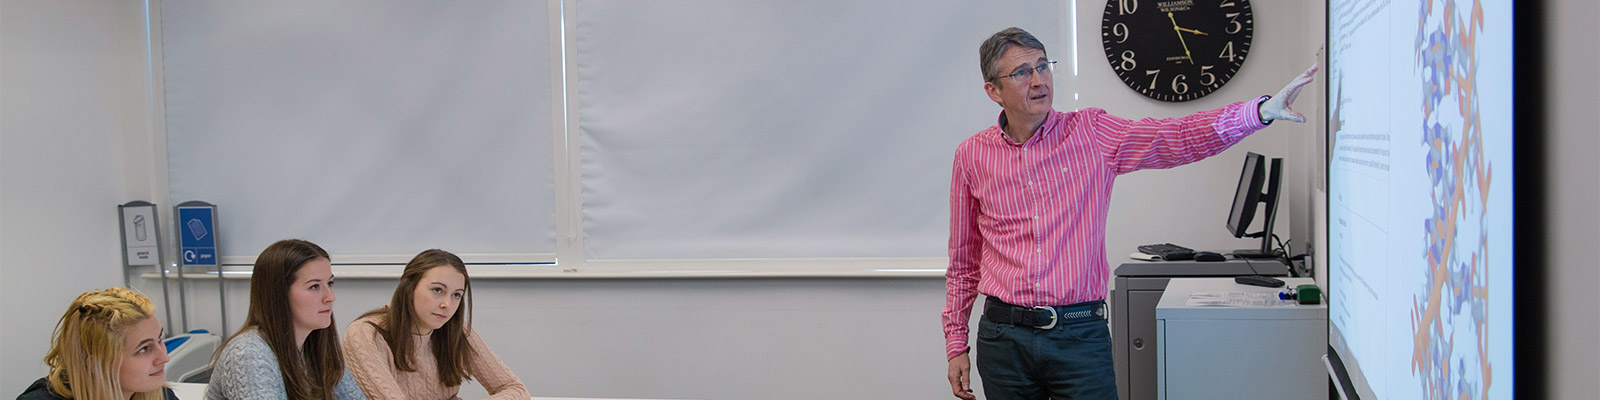 A lecturer stands in front of a white board